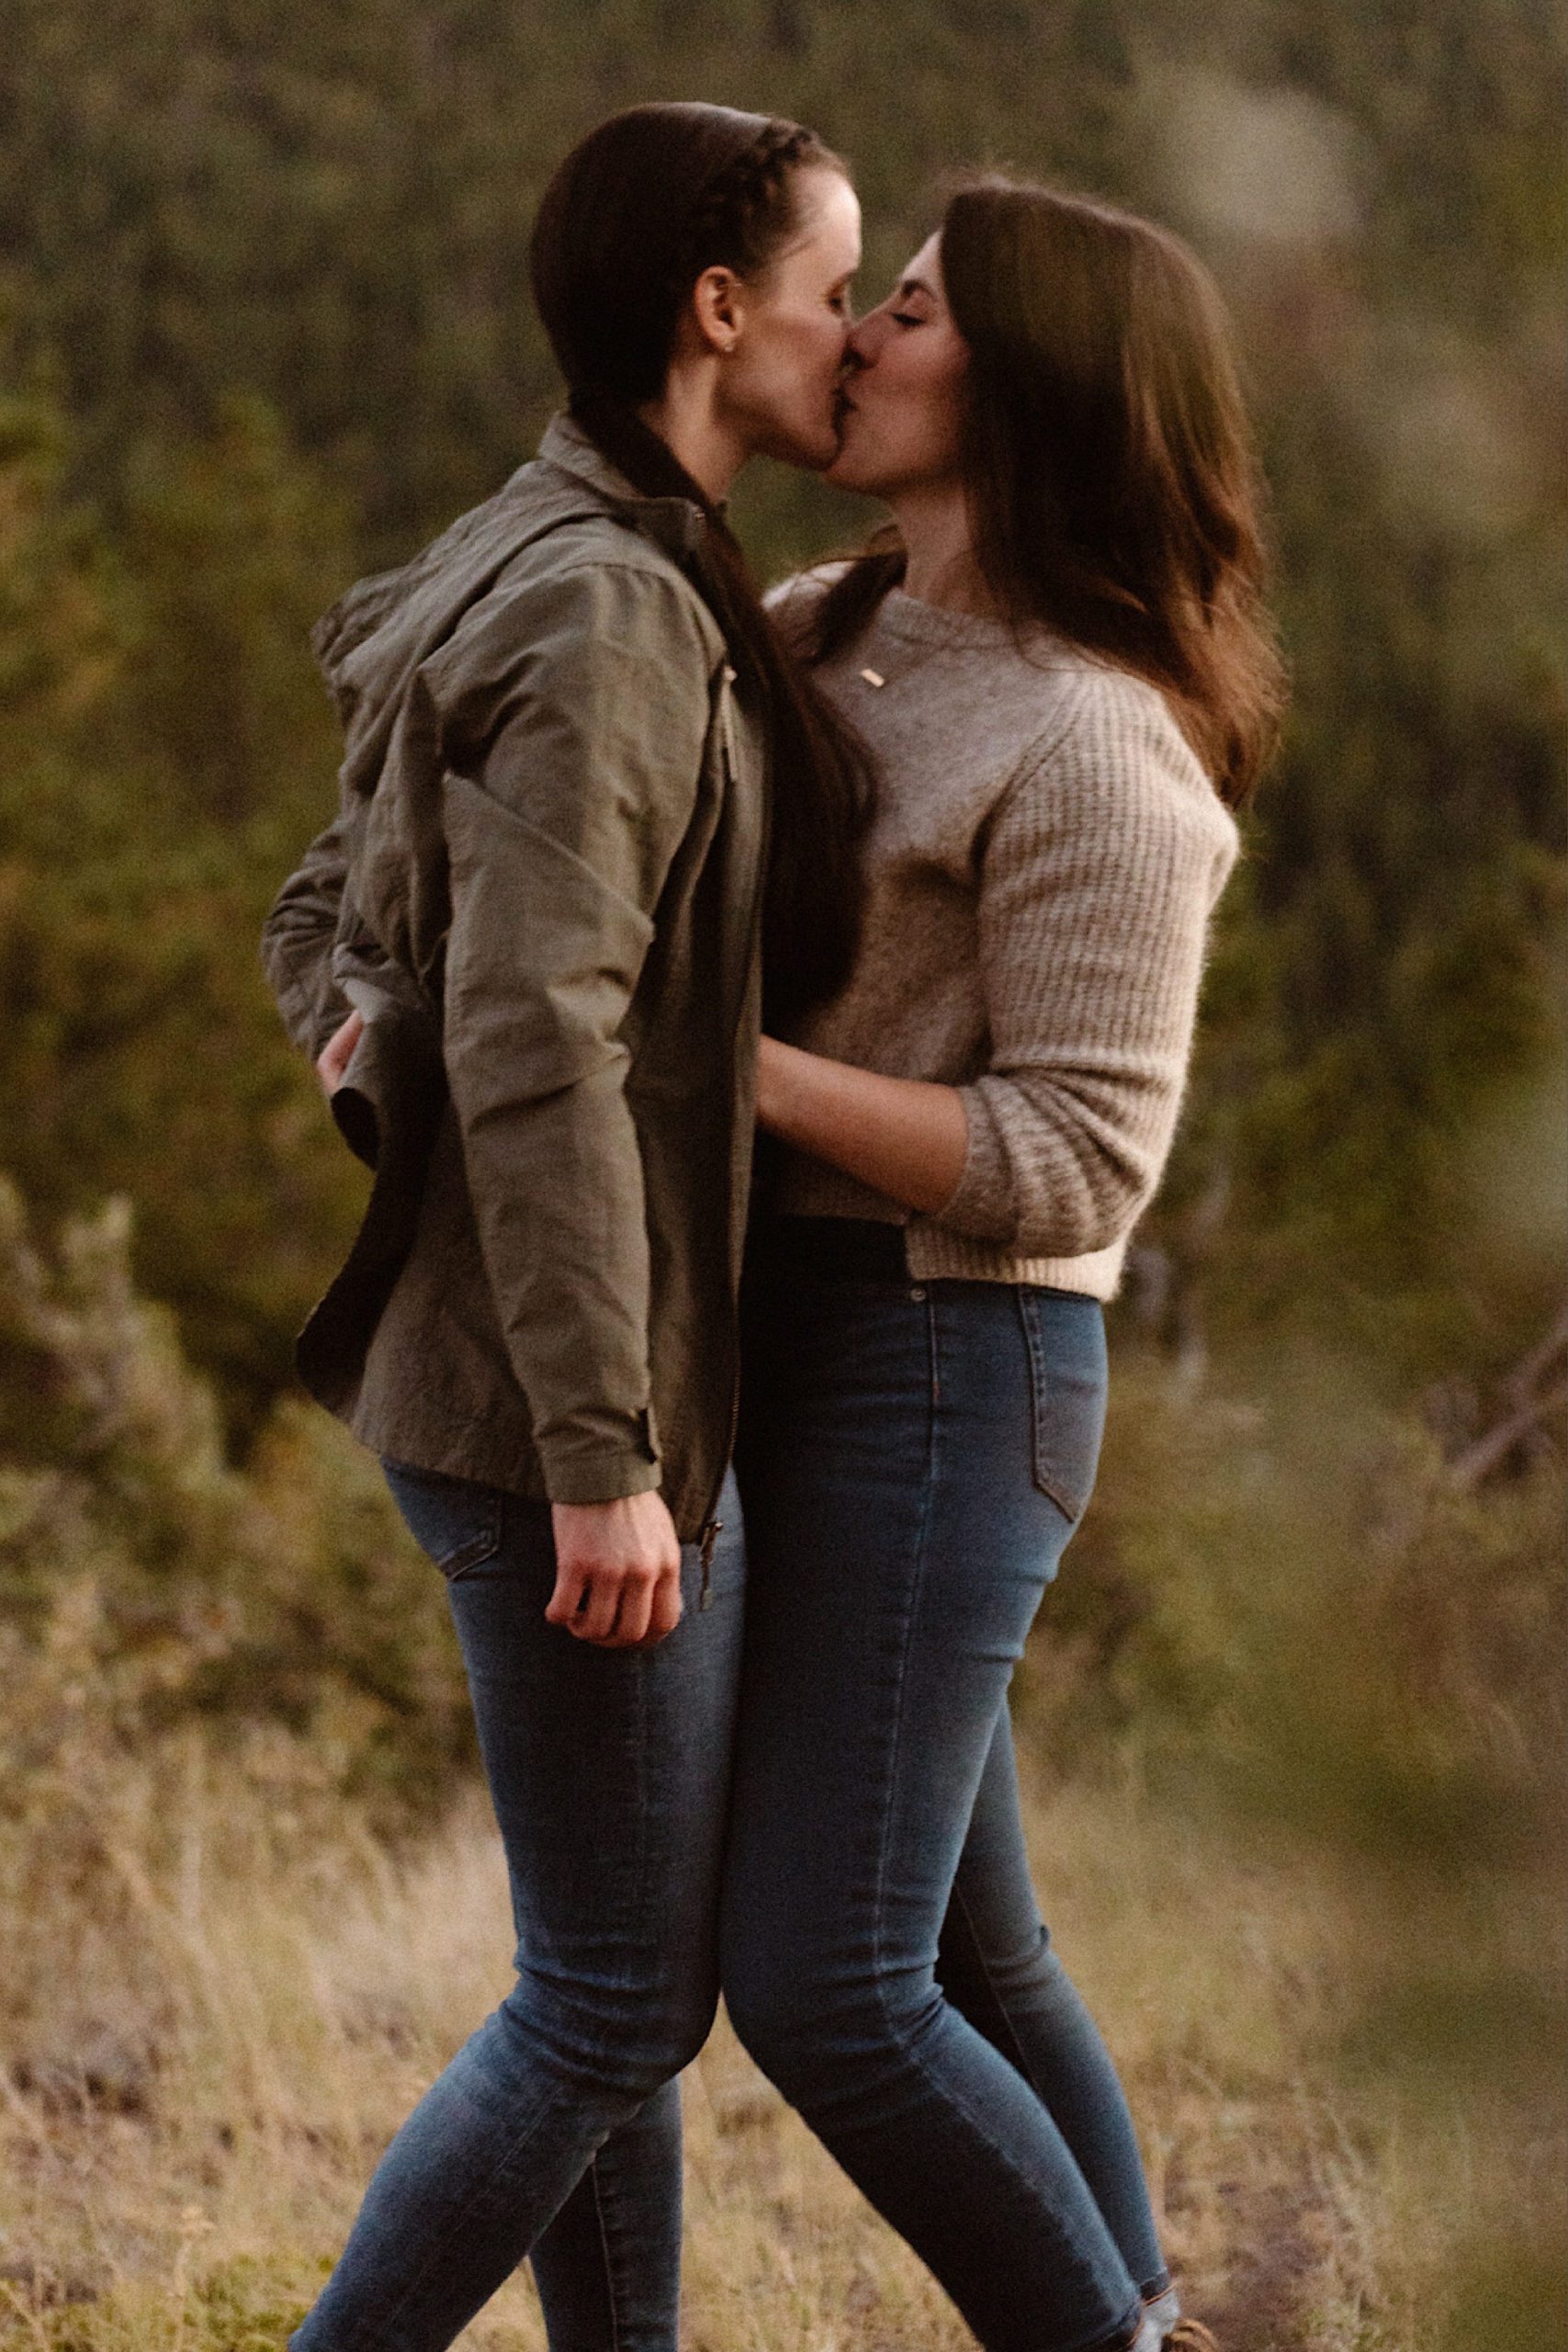 A lesbian engagement couple cuddles together at Golden Gate Canyon State Park for their Colorado engagement photos. Lesbian engagement photos | LGBTQ engagement photos in Denver | Denver engagement photos | Boulder engagement photos | Colorado engagement photos | LGBTQ Colorado engagement | Photo by Colorado elopement photographer, Denver elopement photographer, Ashley Joyce Photography.